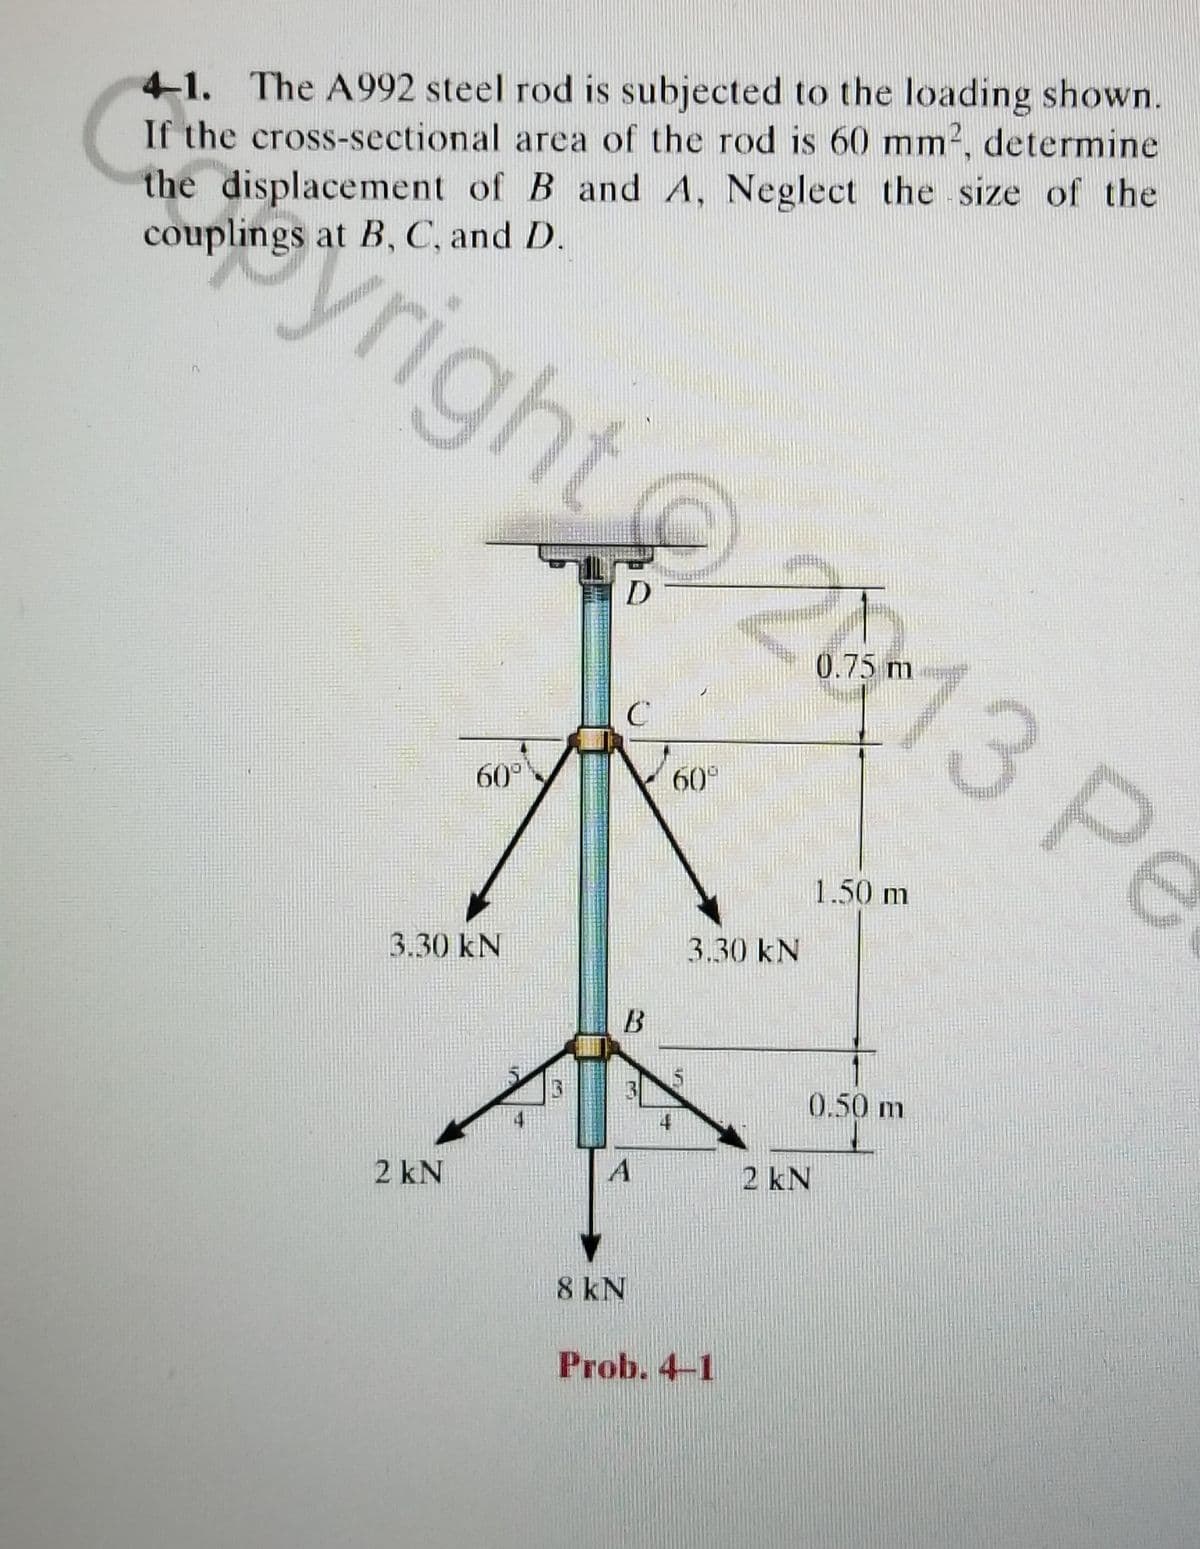 41. The A992 steel rod is subjected to the loading shown.
If the cross-sectional area of the rod is 60 mm2, determine
the displacement of B and A, Neglect the size of the
couplings at B, C, and D.
yright
13 Pe
0.75 m
60°
60
1.50 m
3.30 kN
3.30 kN
0.50 m
2 kN
2 kN
8 kN
Prob. 4-1
